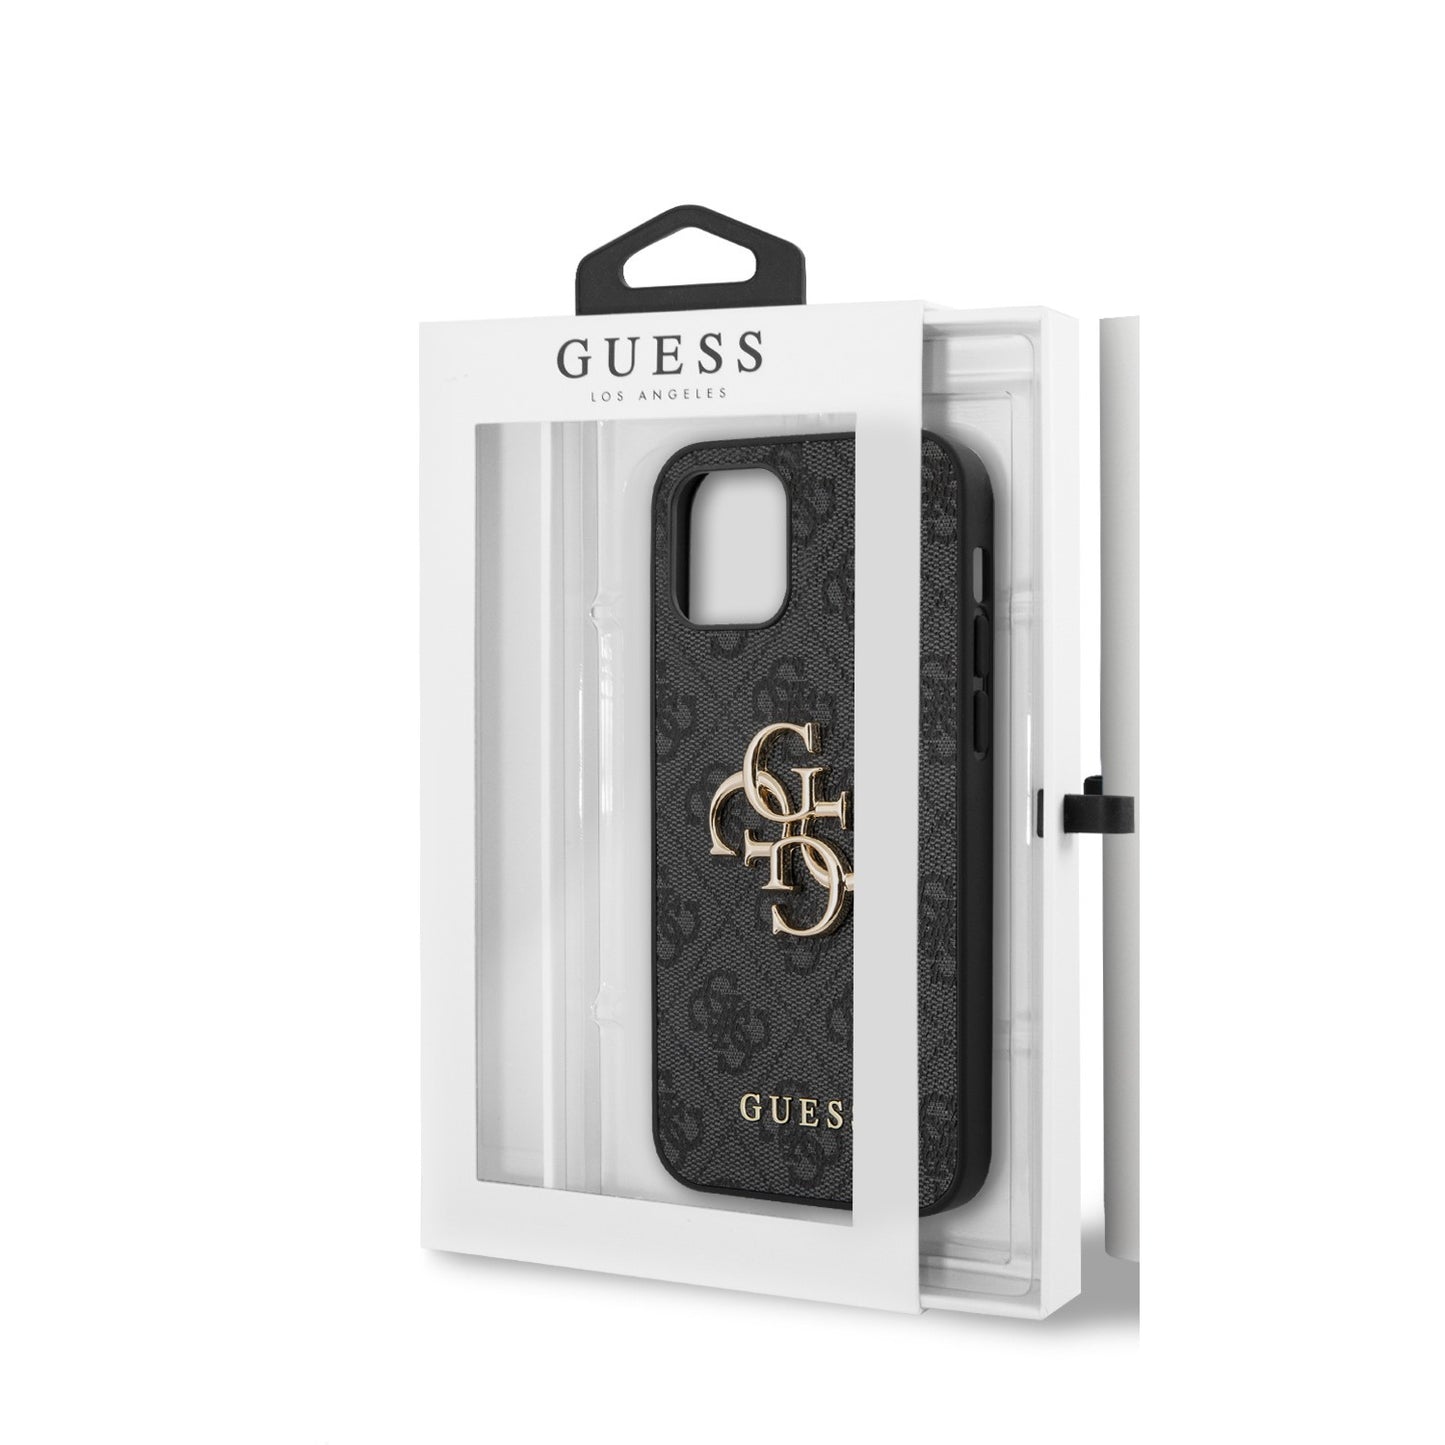 Guess iPhone 12/12 PRO Backcover - Gold 4G Logo - Grijs